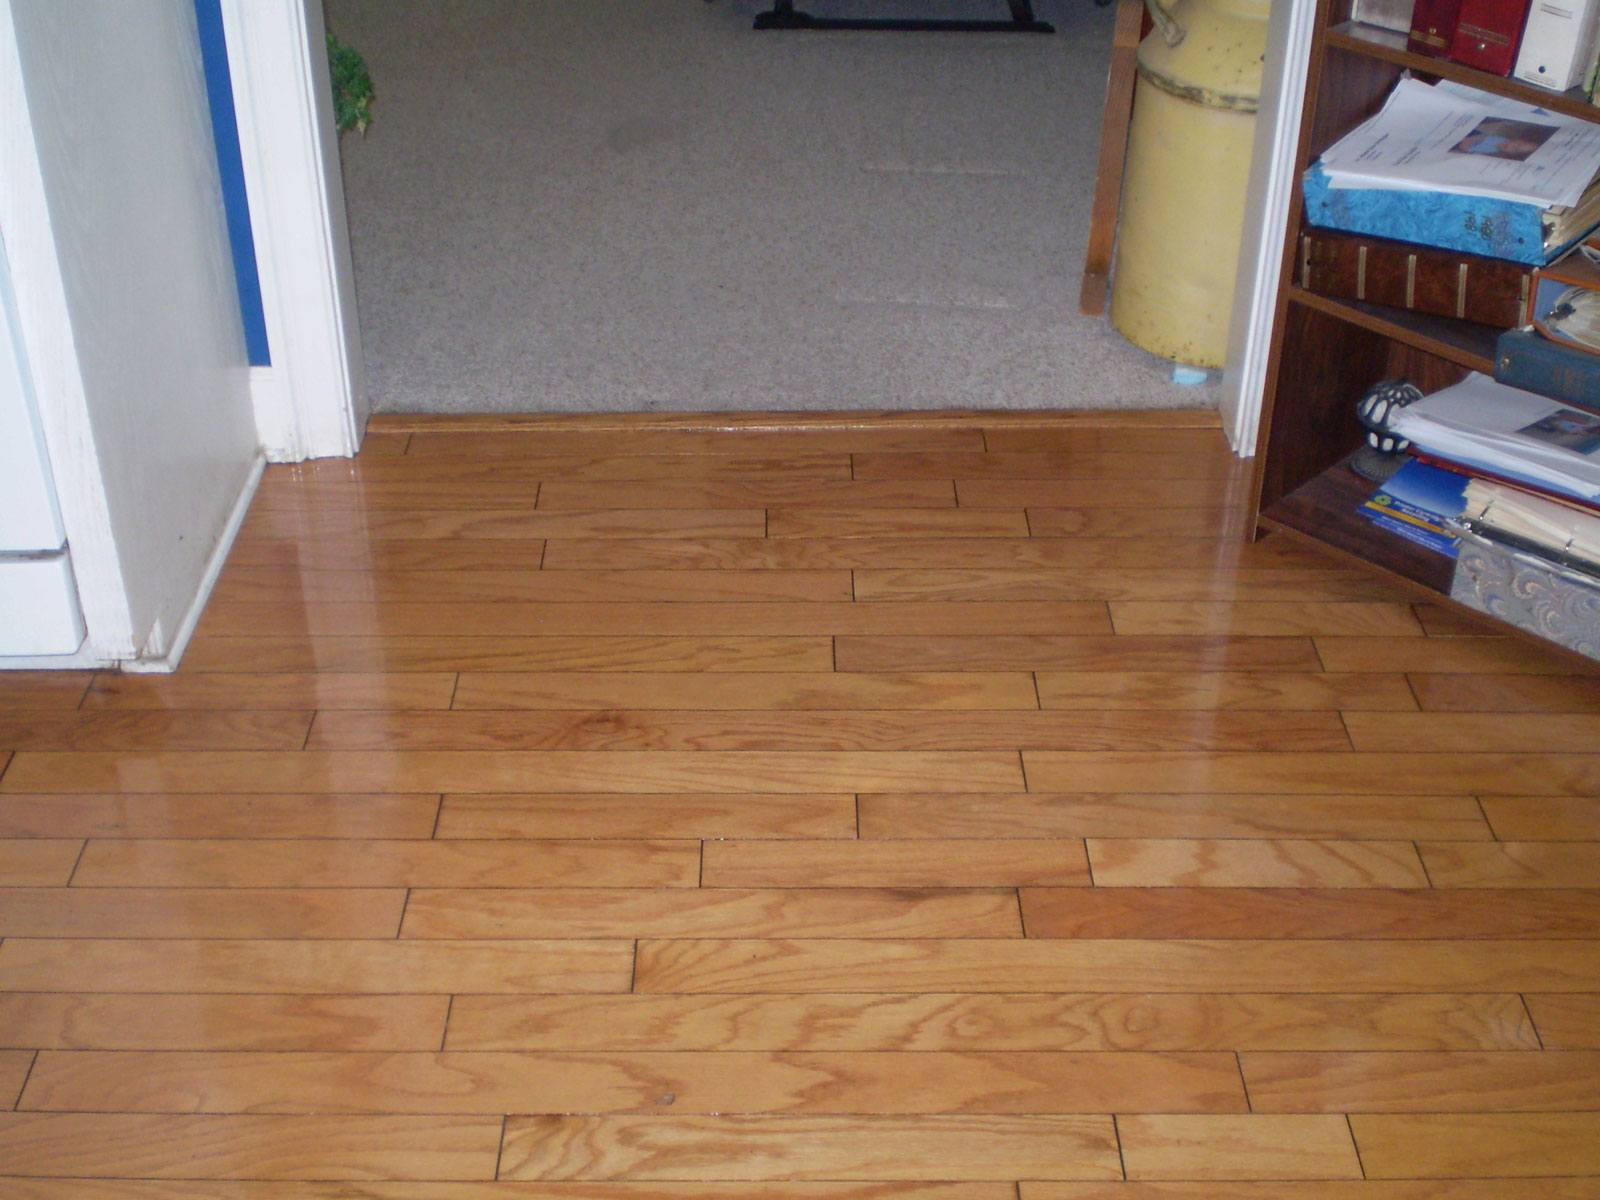 15 Unique Vinegar and Hardwood Floors 2024 free download vinegar and hardwood floors of best how much does new flooring cost trends best flooring ideas in how much does flooring cost awesome kitchen floor tile installation cost lovely ctm how much